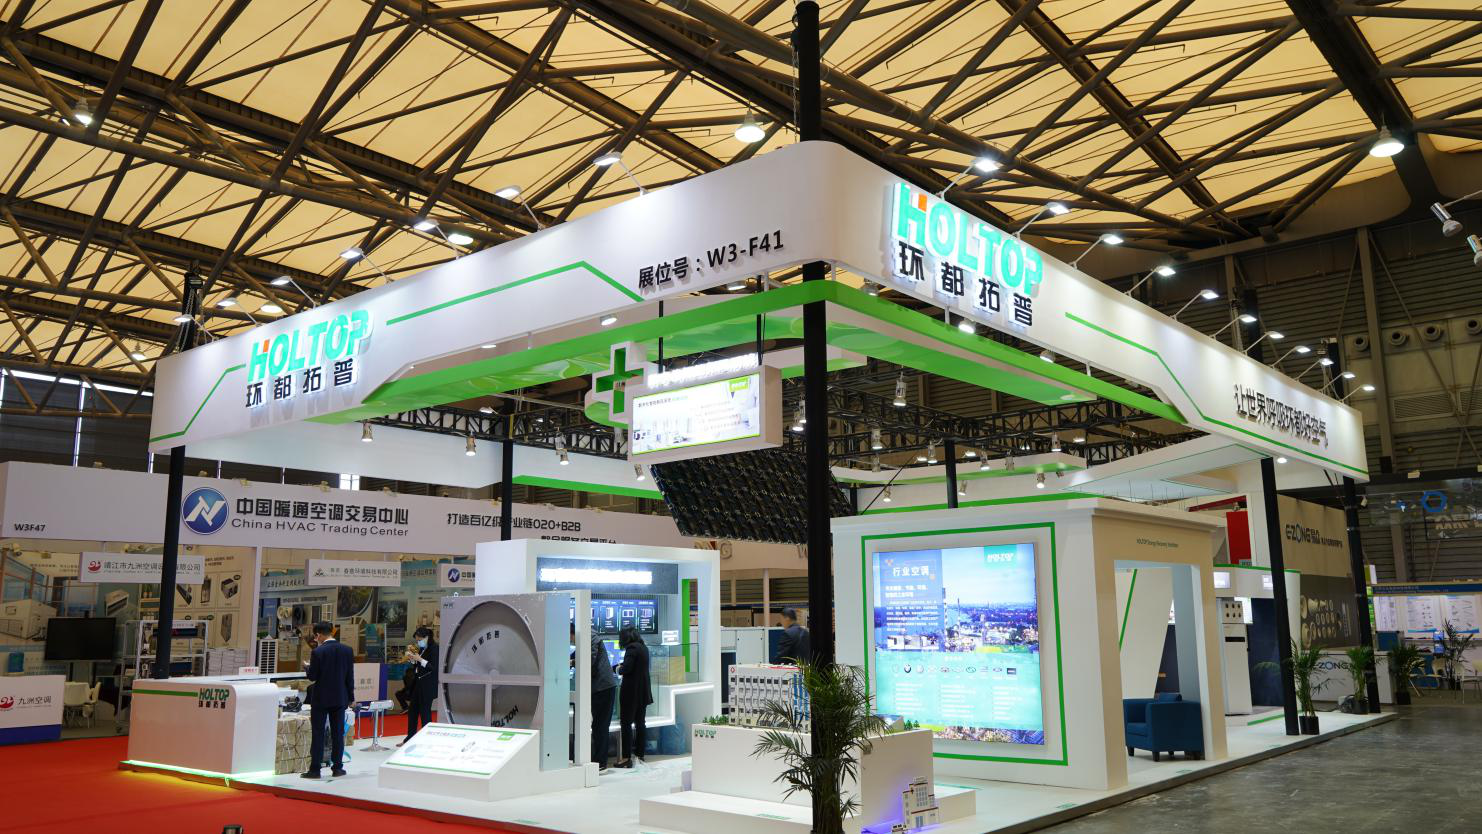 Holtop at 2021 Refrigeration Exhibition